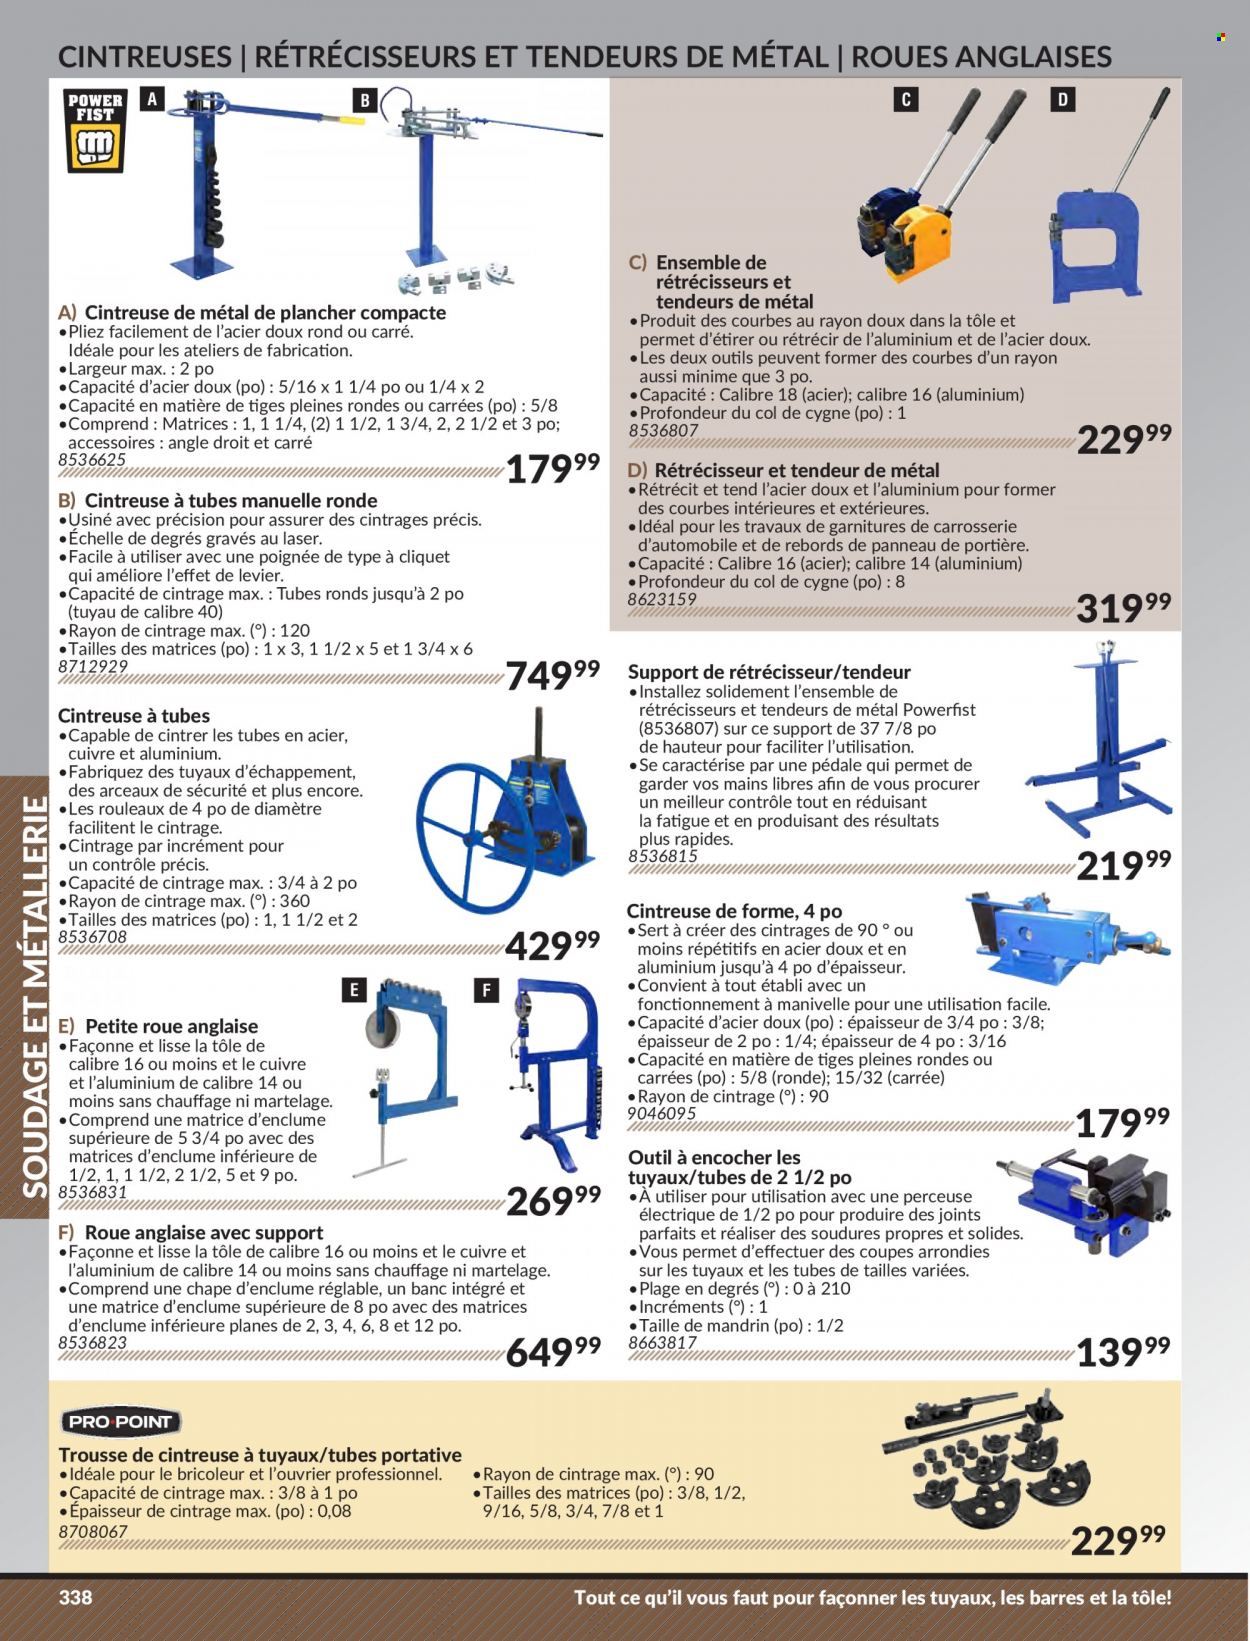 thumbnail - Princess Auto Flyer - Sales products - laser. Page 344.